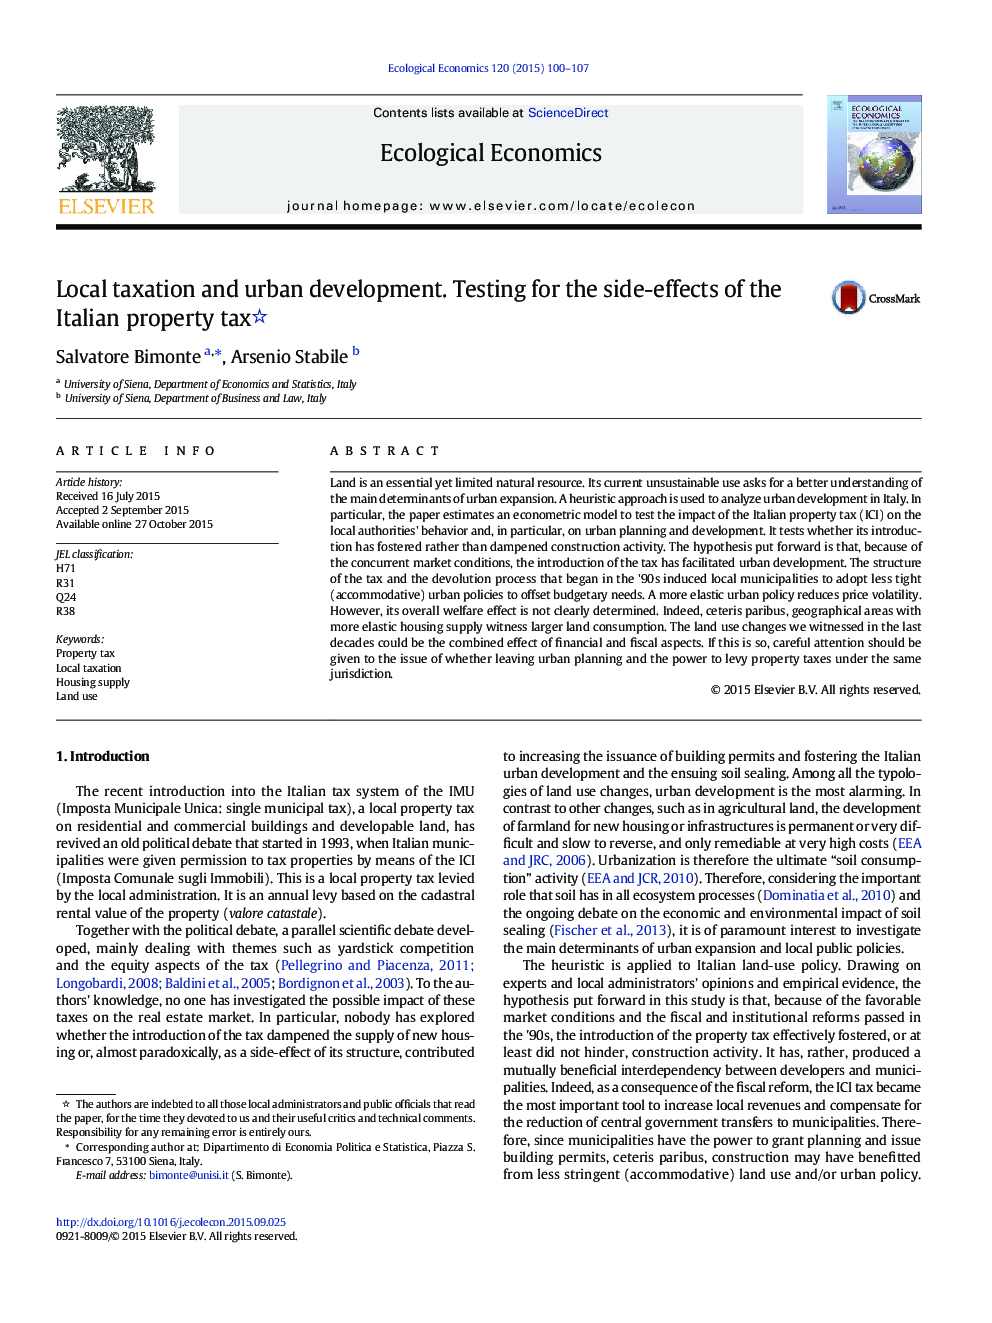 Local taxation and urban development. Testing for the side-effects of the Italian property tax